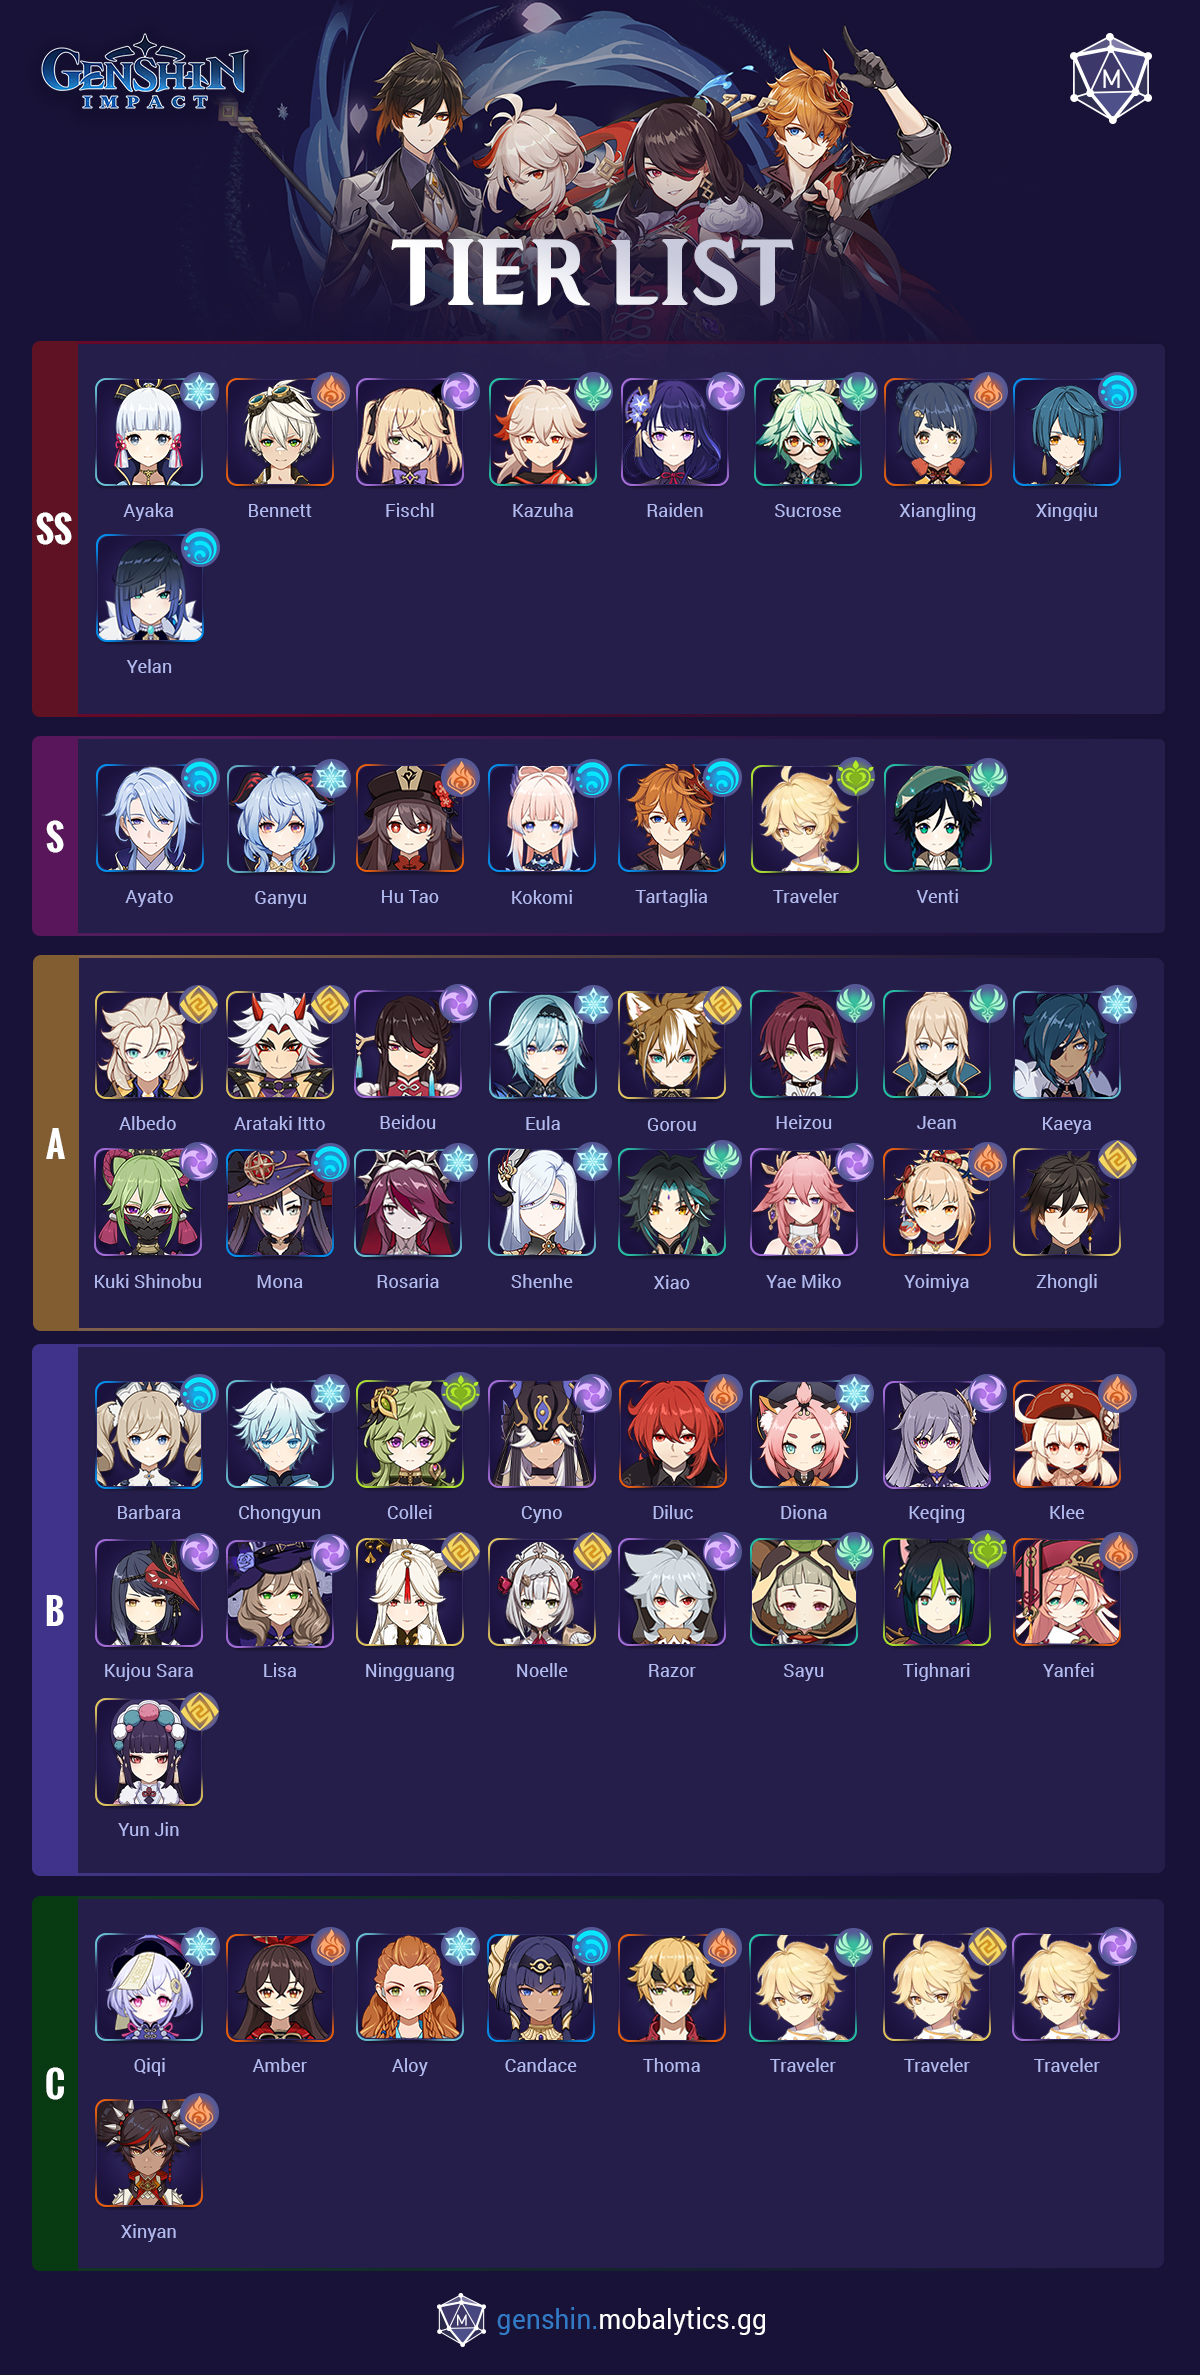 Genshin Weapons Tier List Genshin Impact Weapons List And Tiers Images